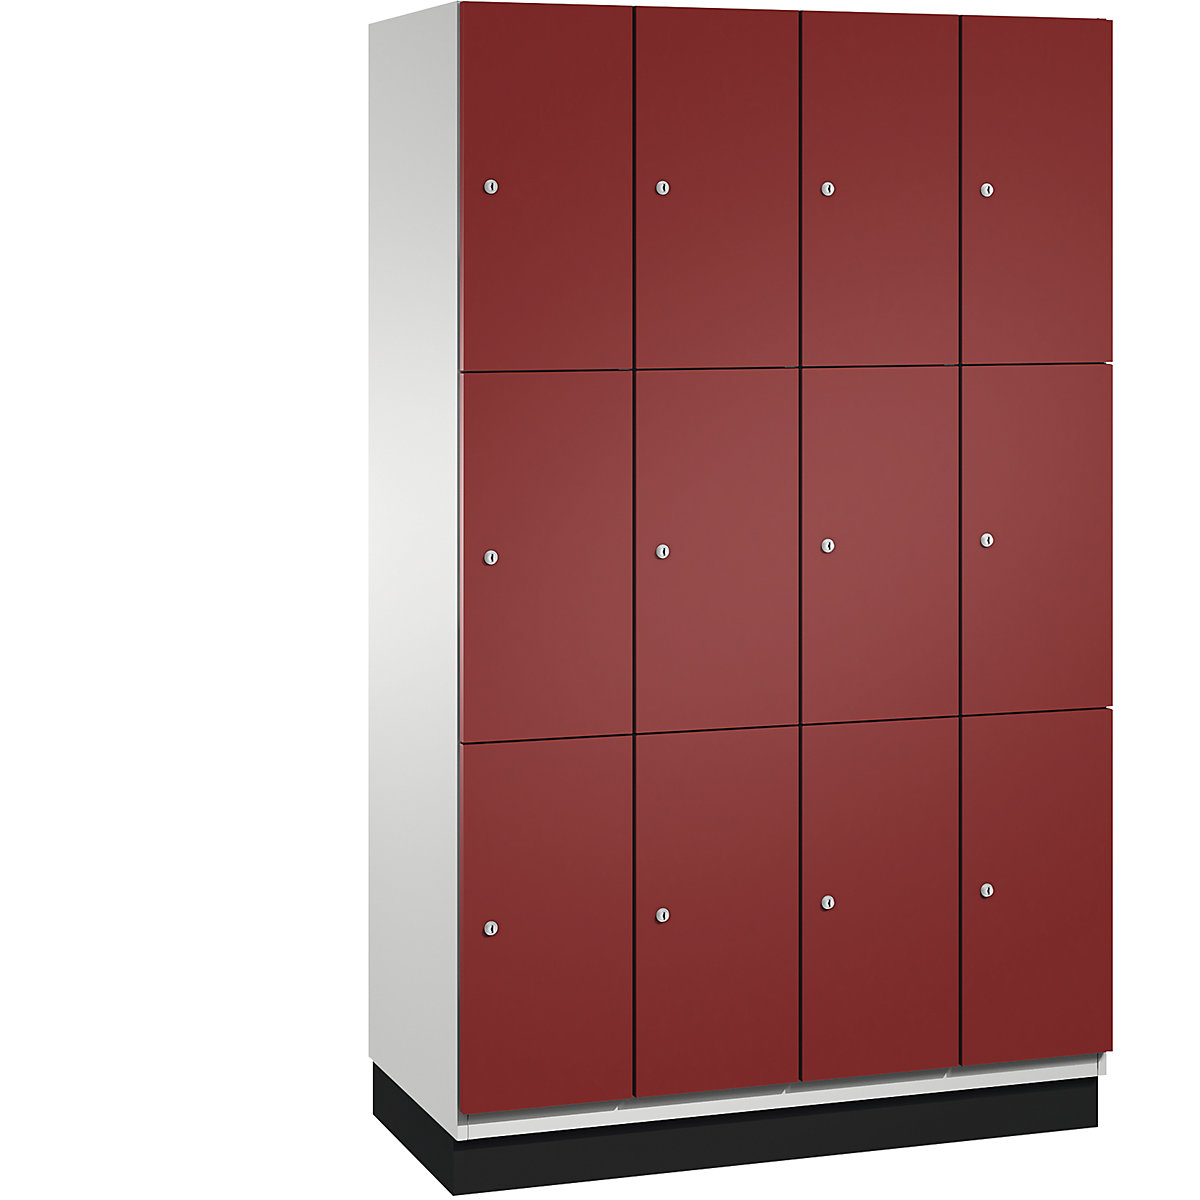 CAMBIO compartment locker with sheet steel doors – C+P, 12 compartments, width 1200 mm, body light grey / door ruby red, compartment height 616.6 mm-22